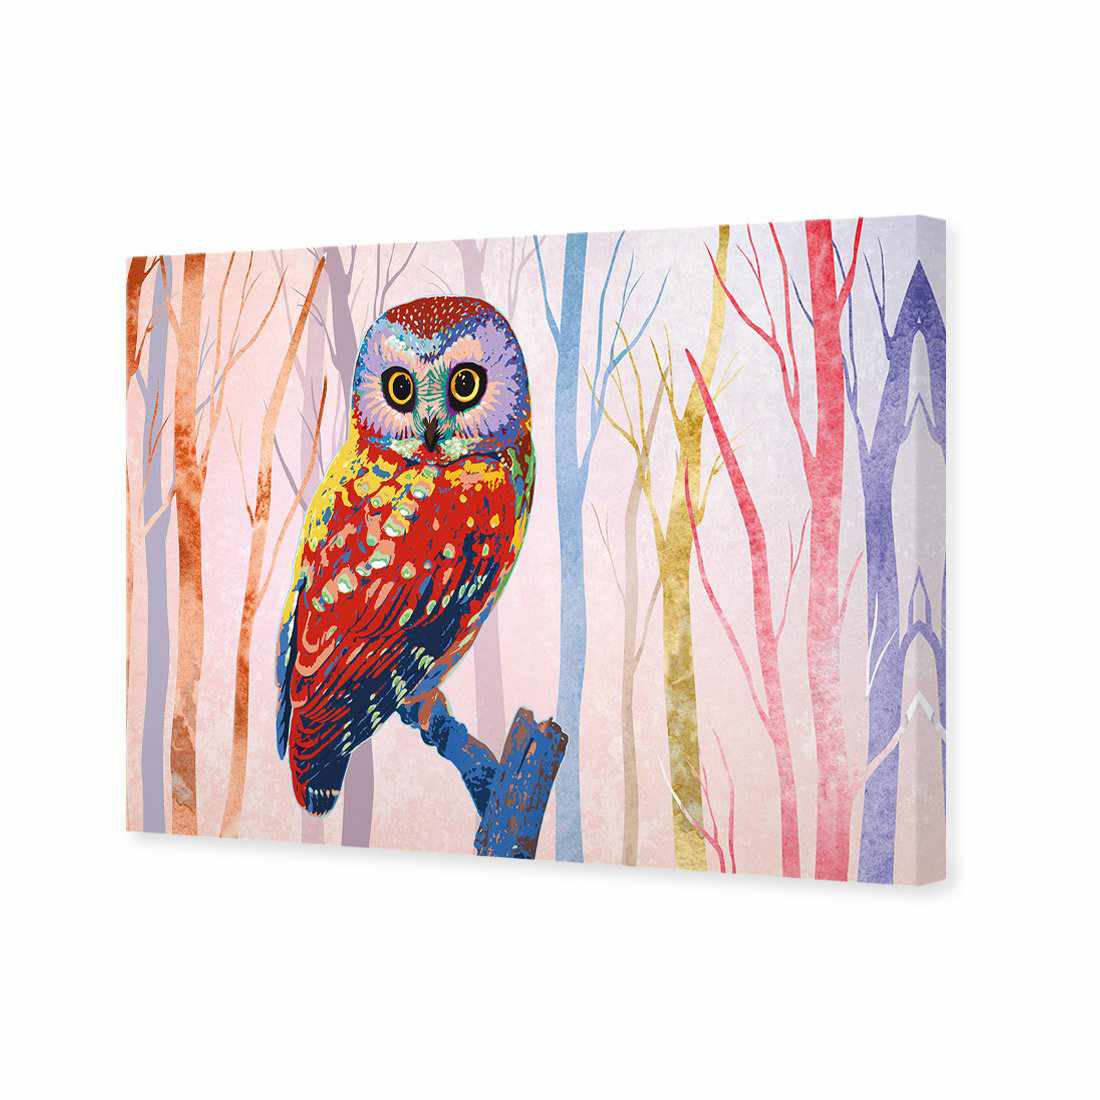 Bright Wise Owl, Light Canvas Art-Canvas-Wall Art Designs-45x30cm-Canvas - No Frame-Wall Art Designs